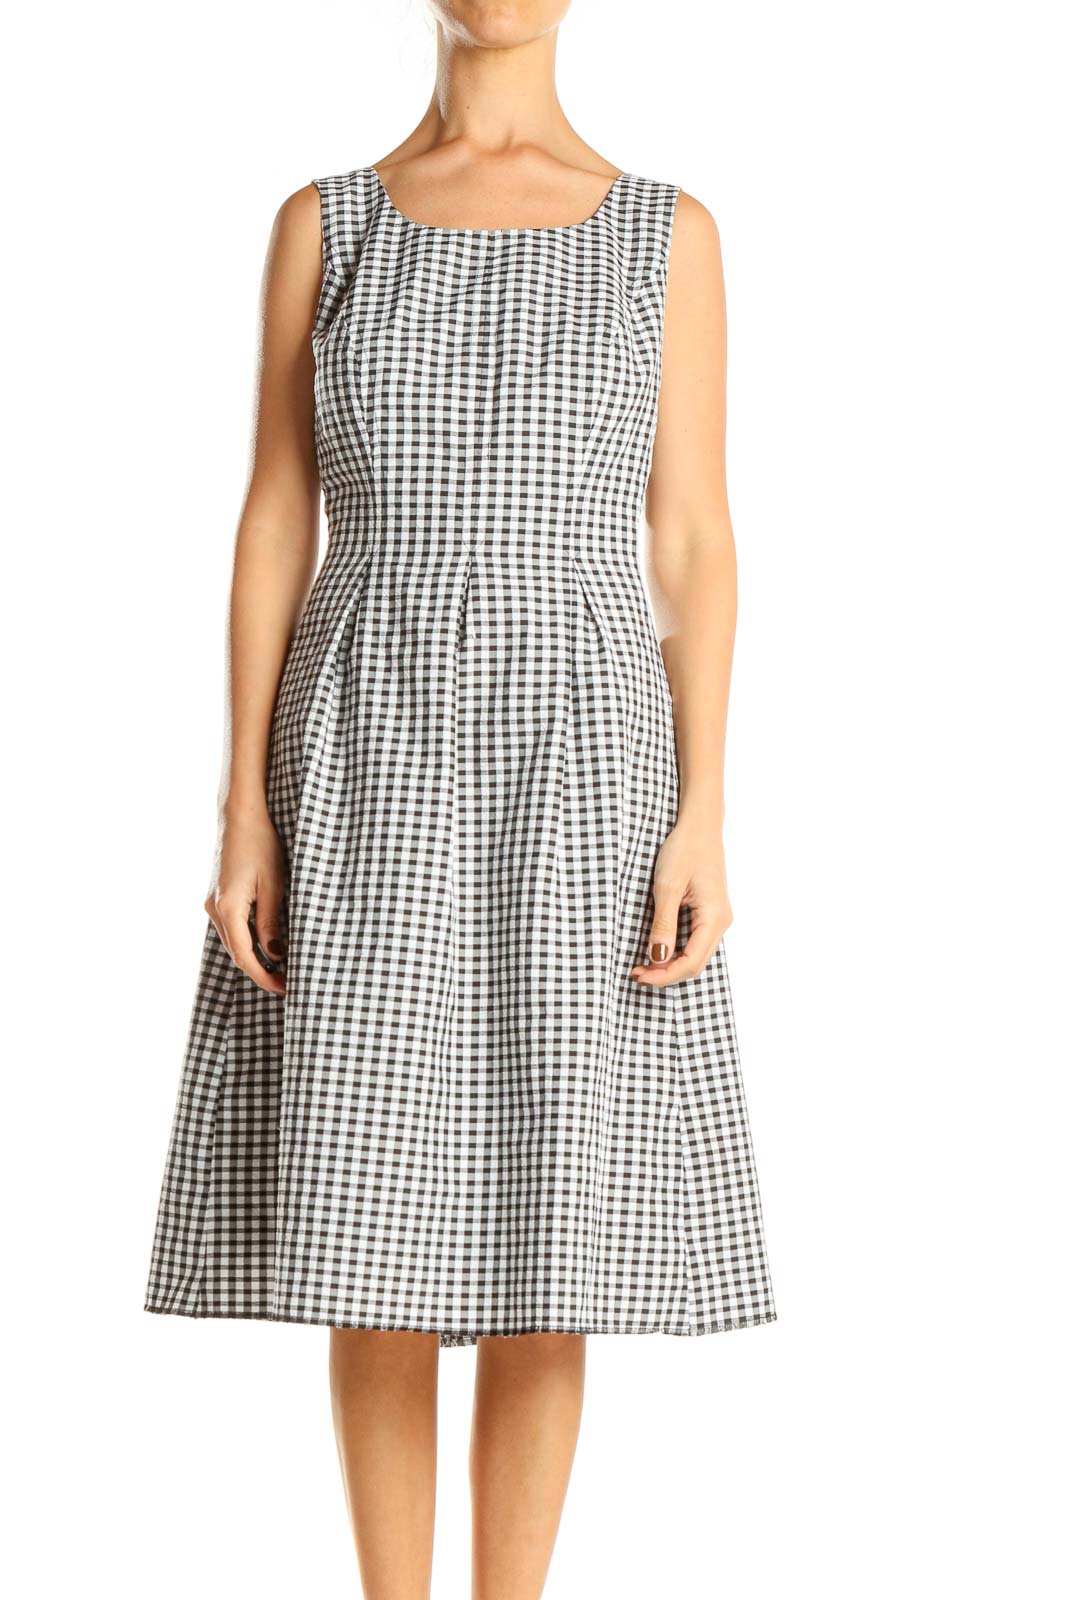 Black White Gingham Work Fit & Flare Dress Front